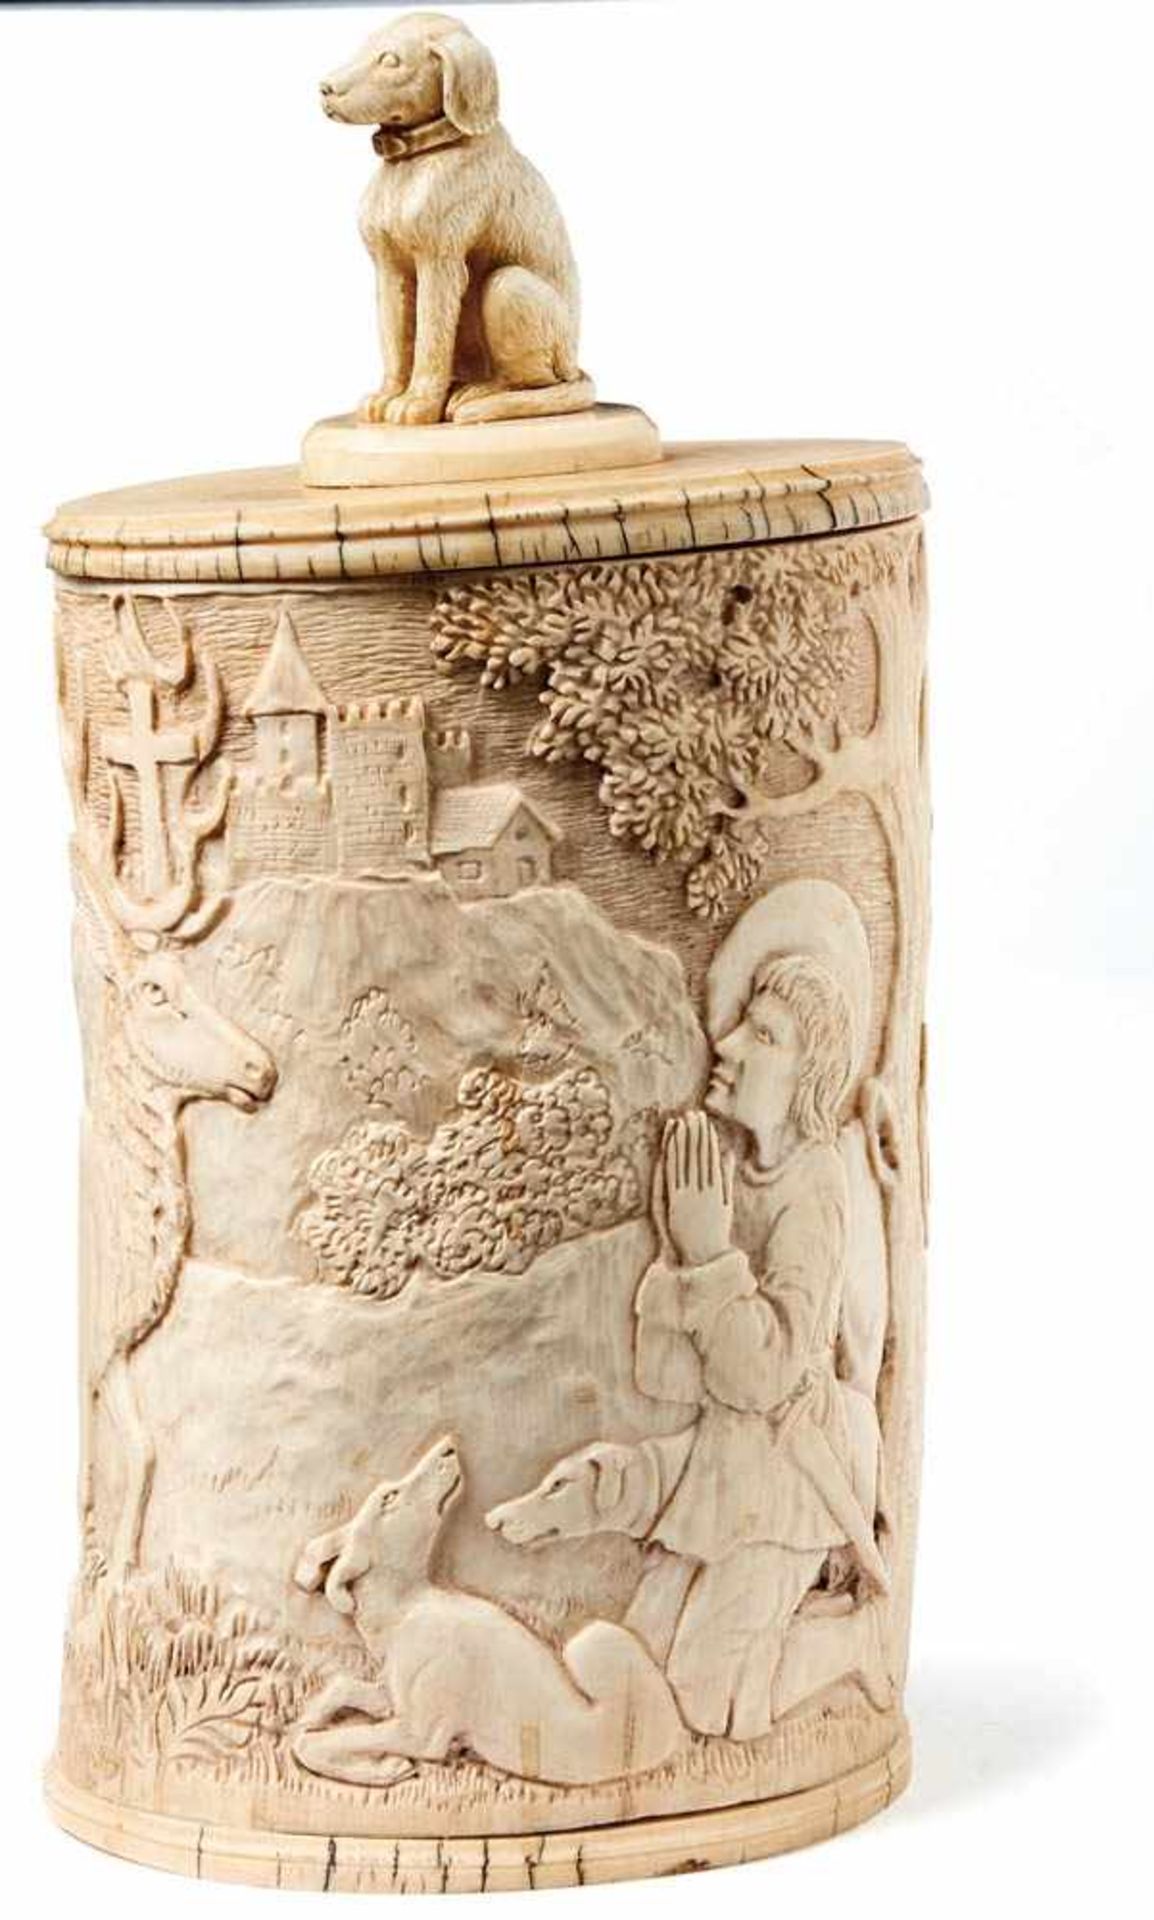 Eckhart, Georg AugustLarge ivory lid box(1817-1890) Oval corpus with circulating relief depicting